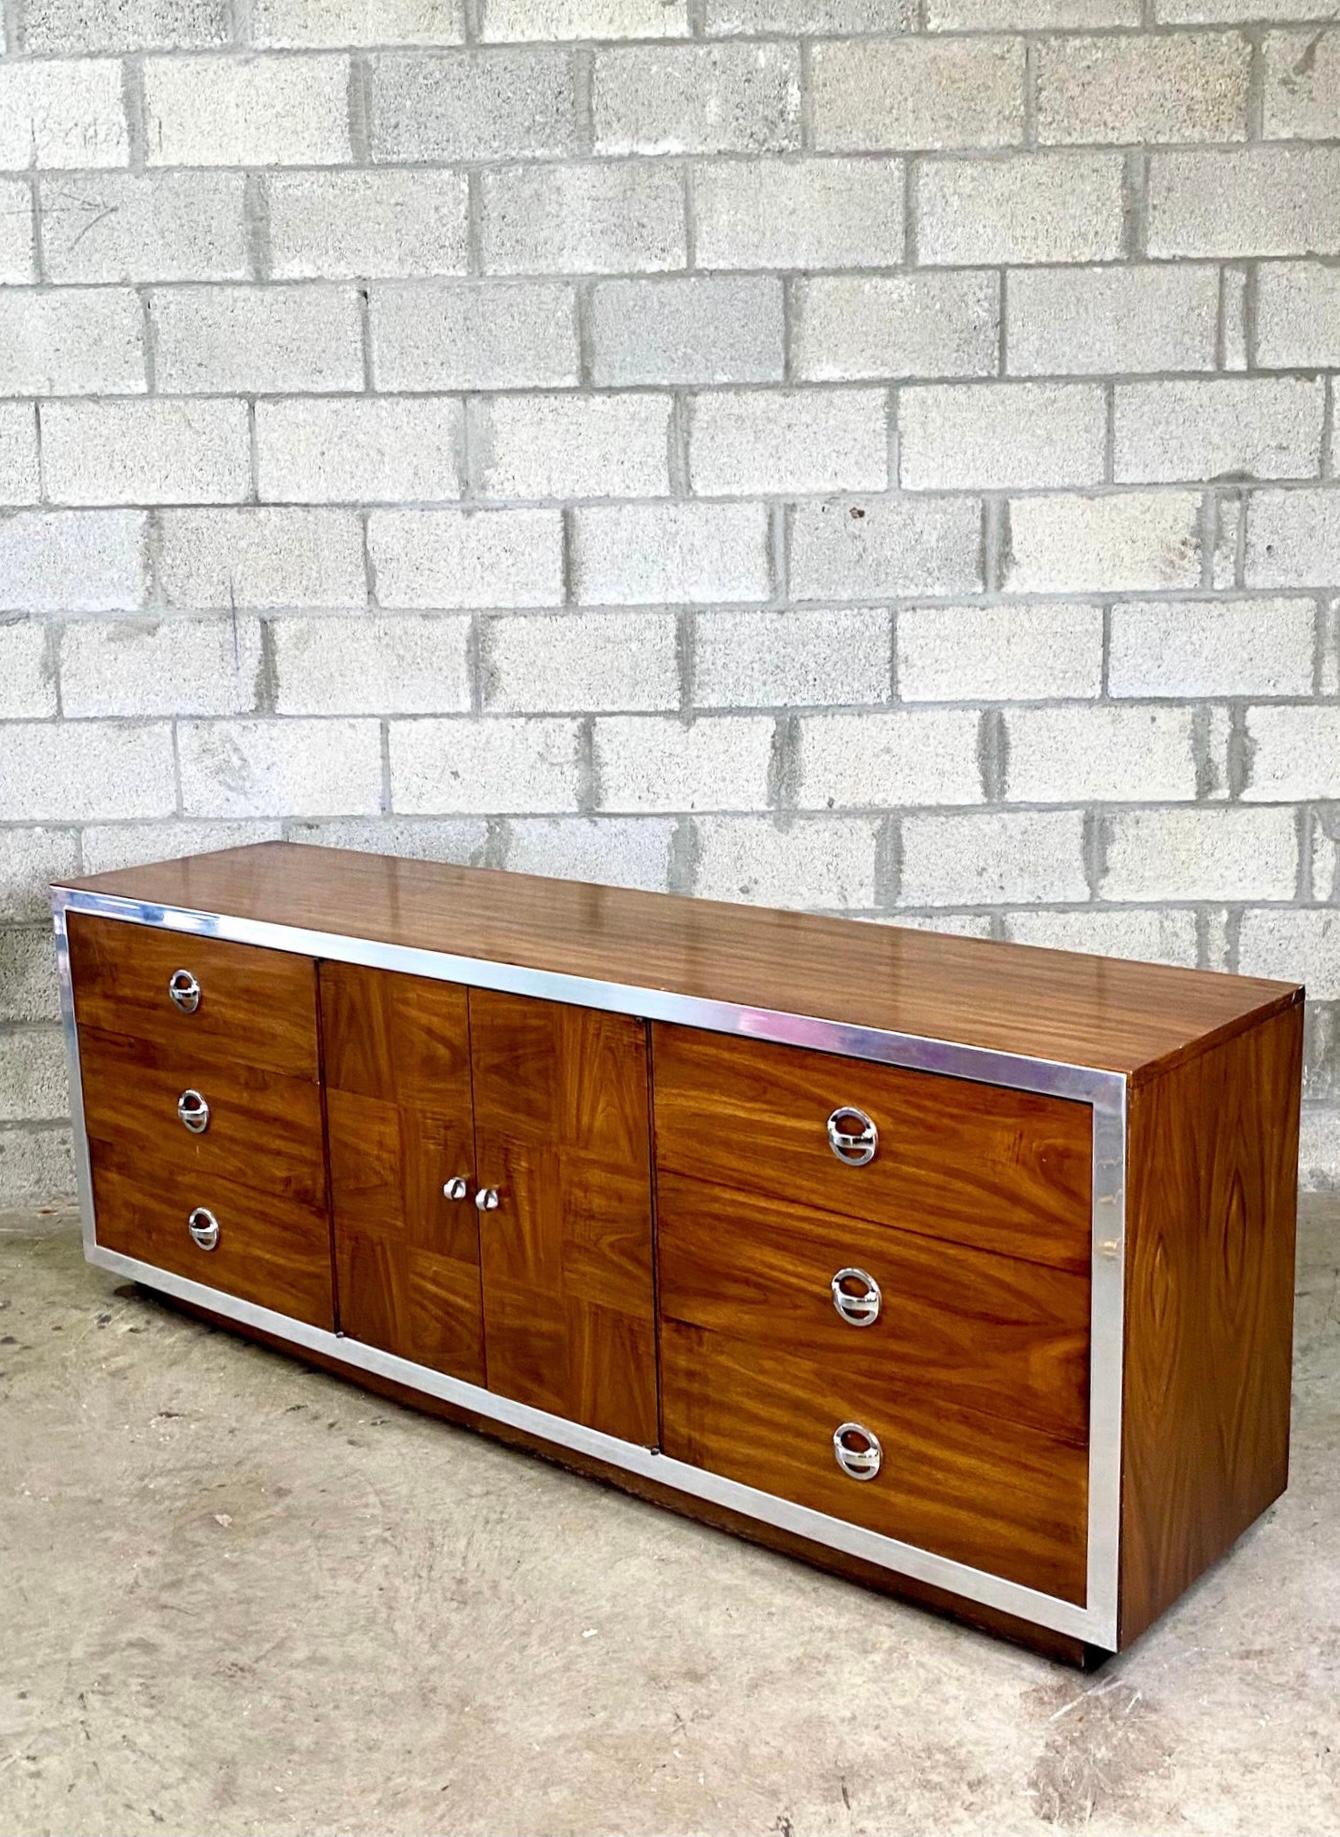 Fantastic midcentury VanLeigh dresser. Stunning wood grain detail with polished chrome trim. Parquet double doors reveal and an additional three drawers for 9 drawers total. Acquired from a Miami estate.